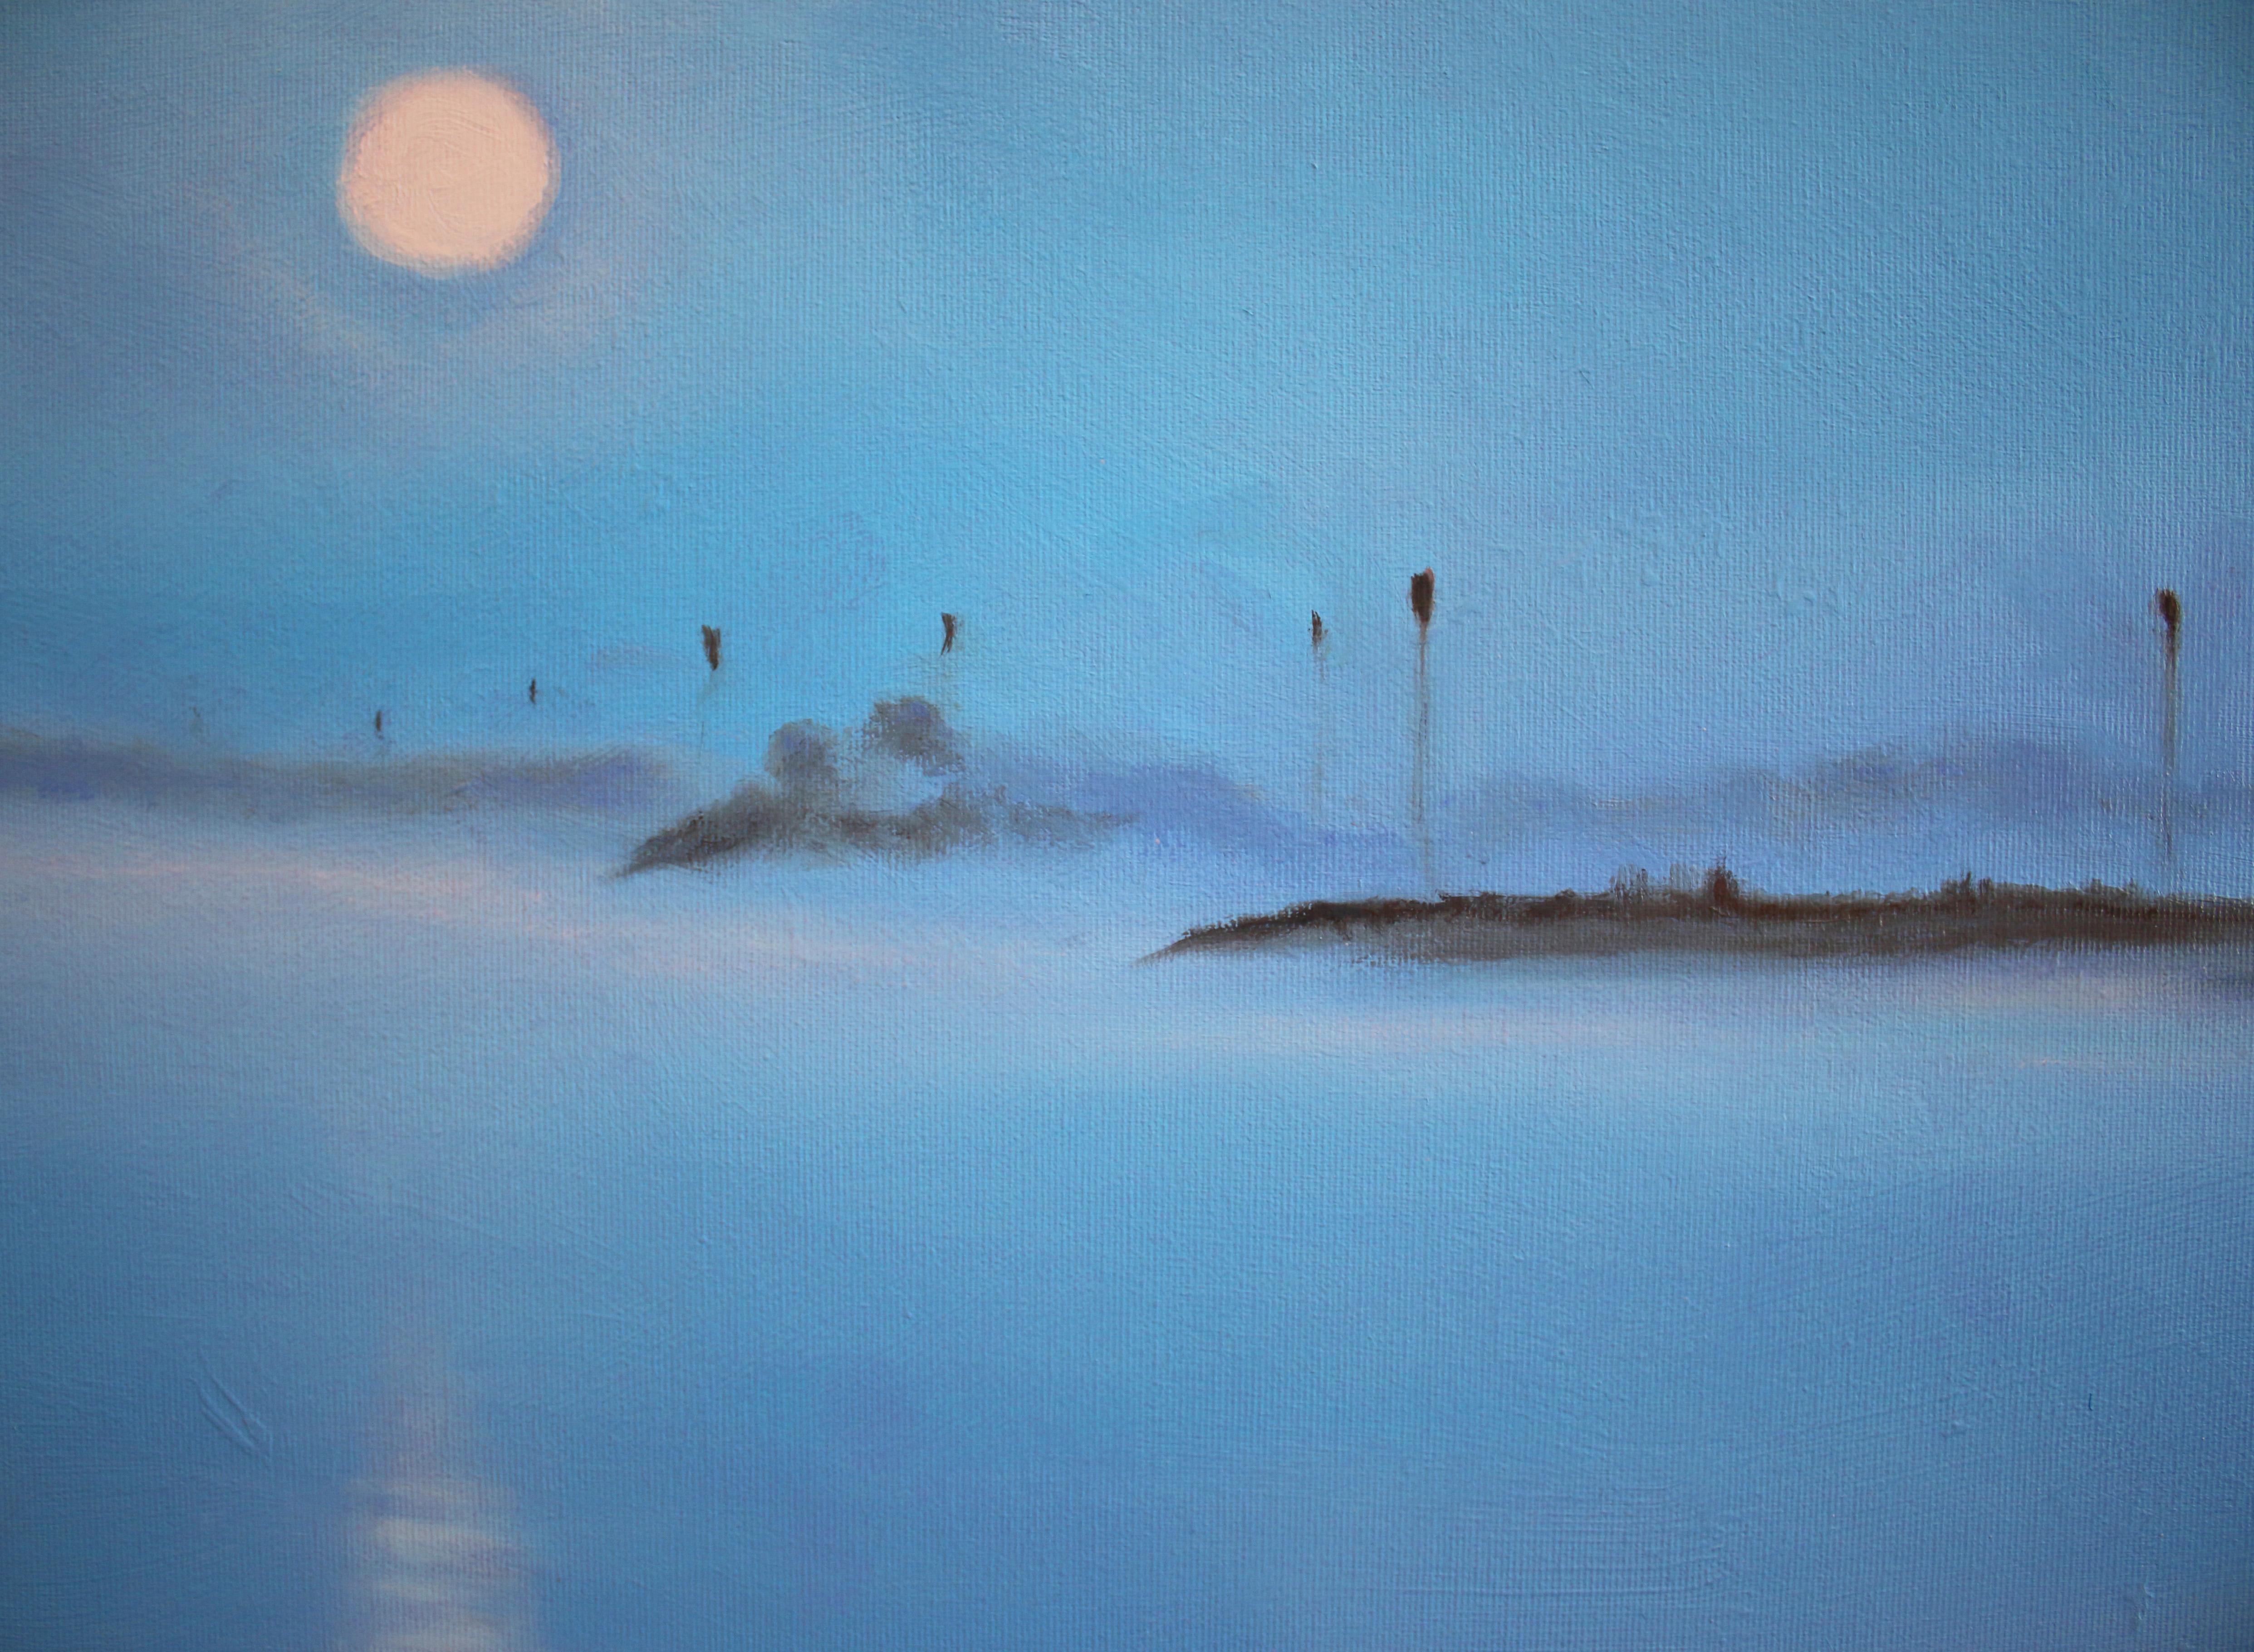 Elbe 17 - contemporary artwork, water landscape oil on canvas in meditative blue - Painting by Michael Pröpper